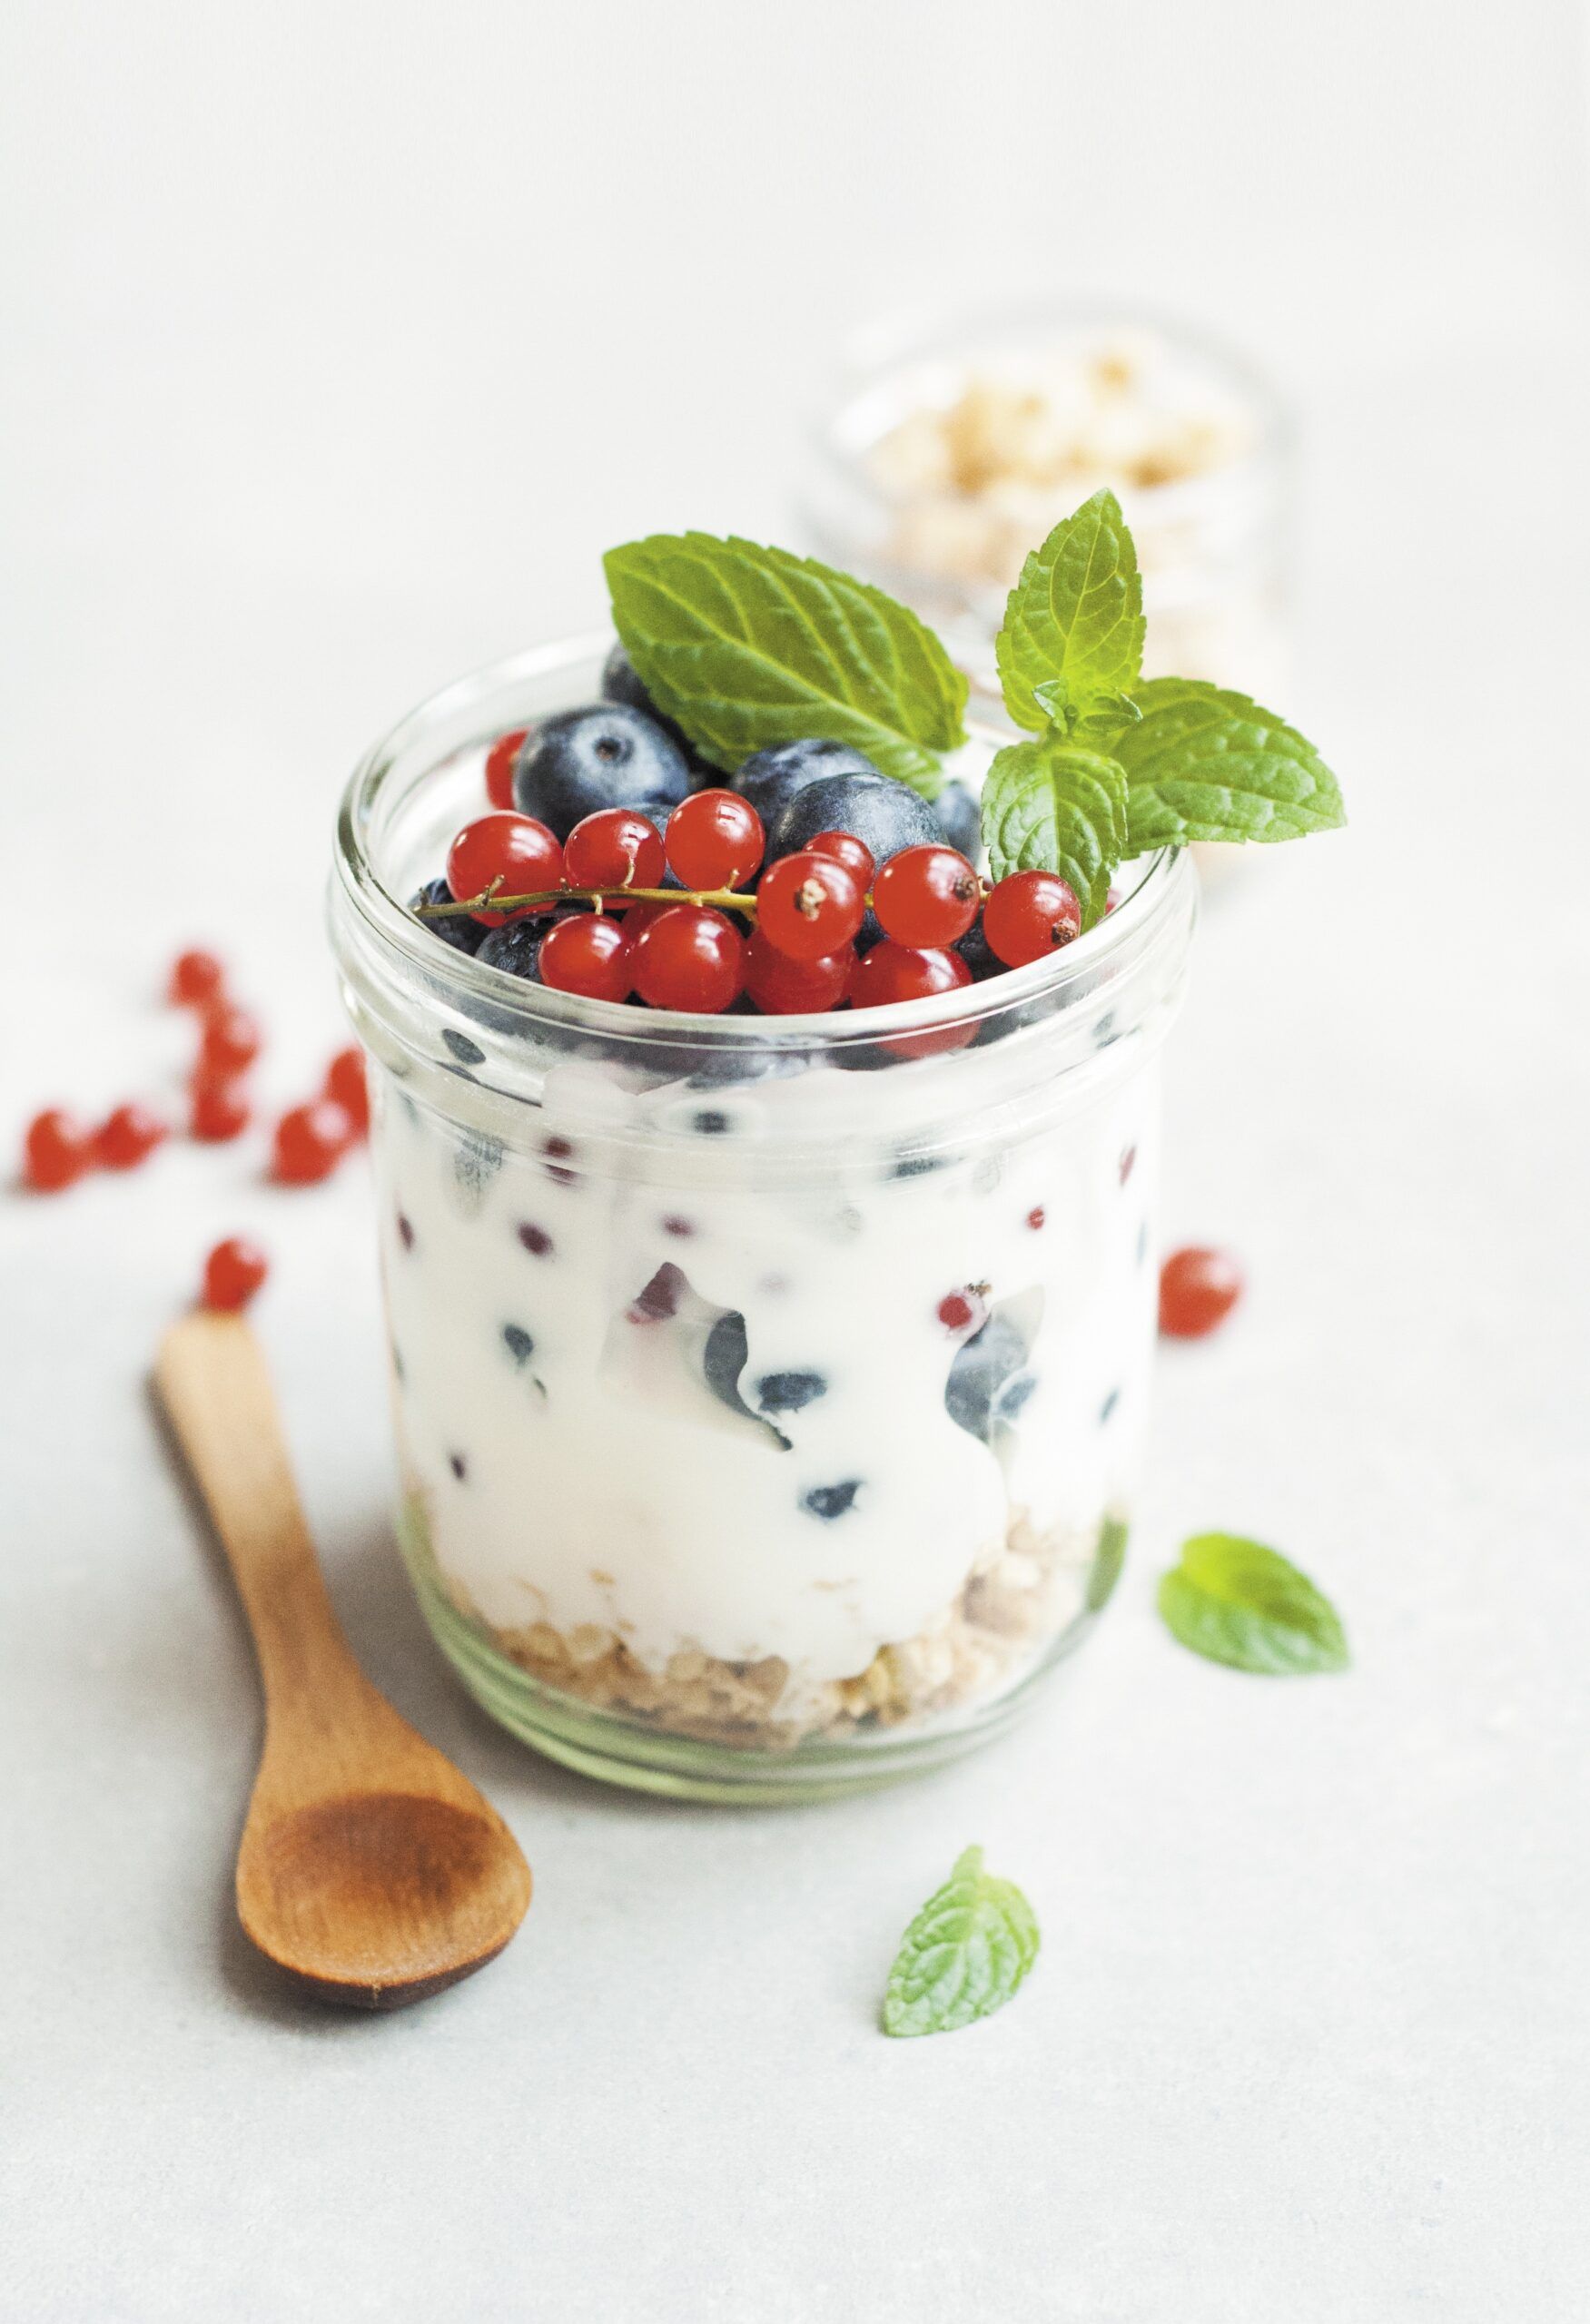 Glass jar full of yogurt and topped with various berries